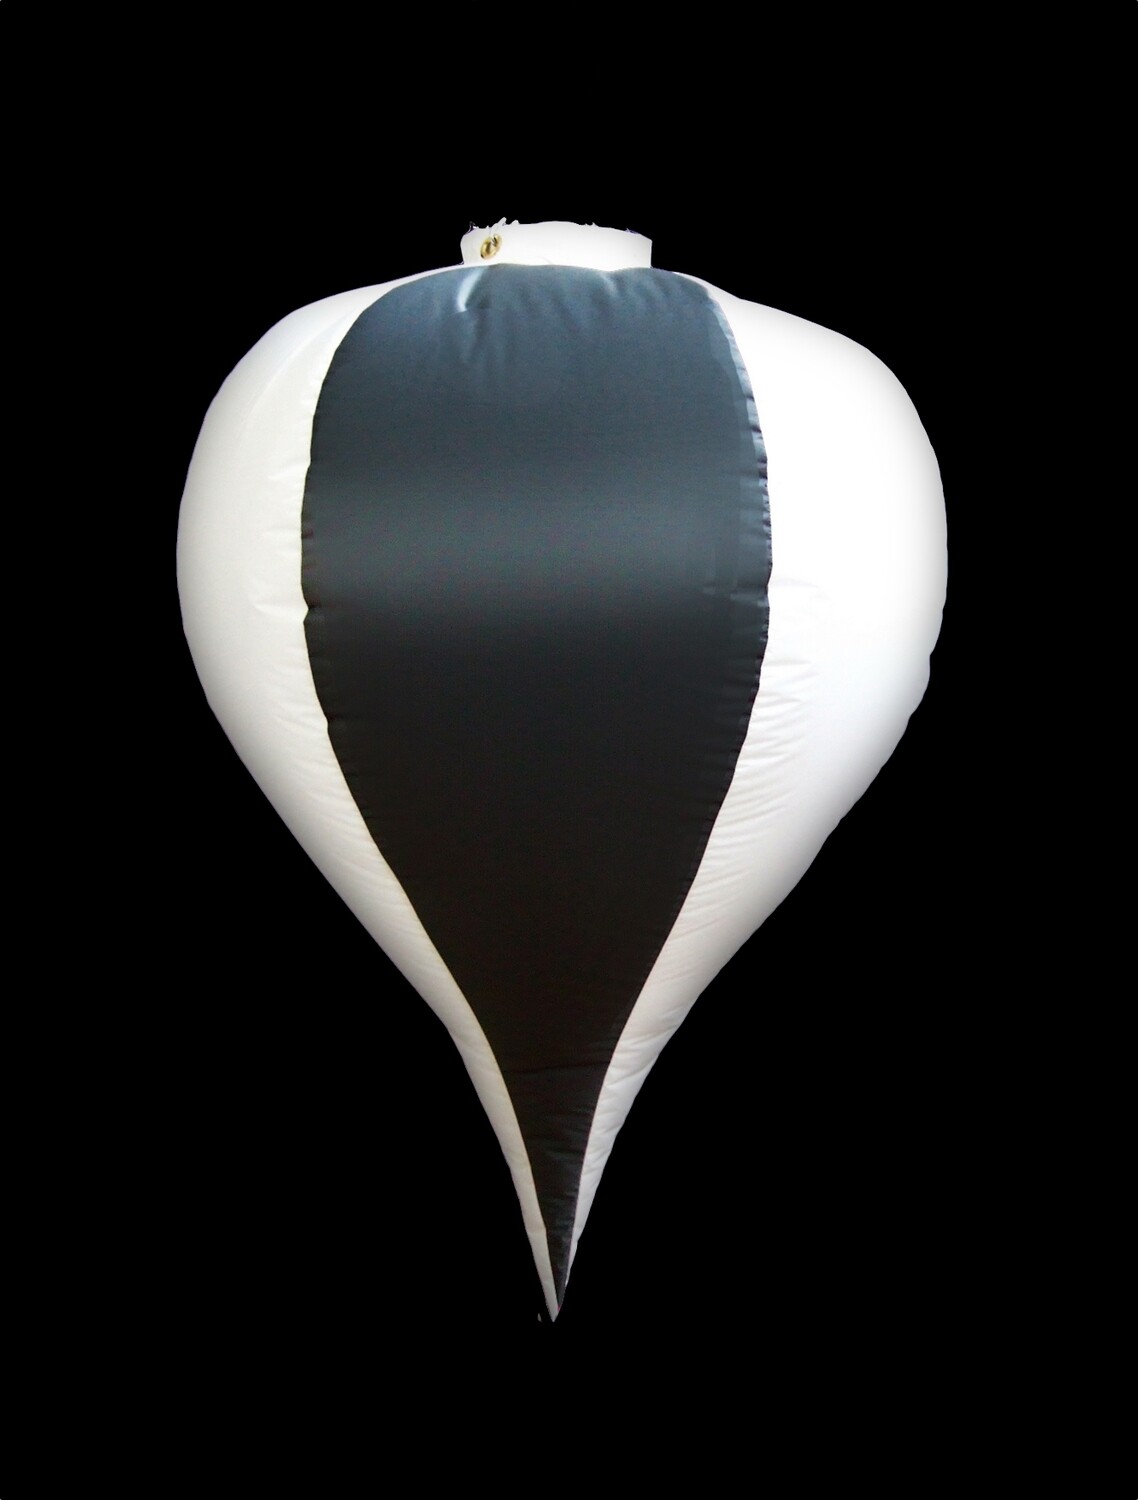 Hanging Inflatable Bauble #1-4.4ft/133cm x 6ft/182cm